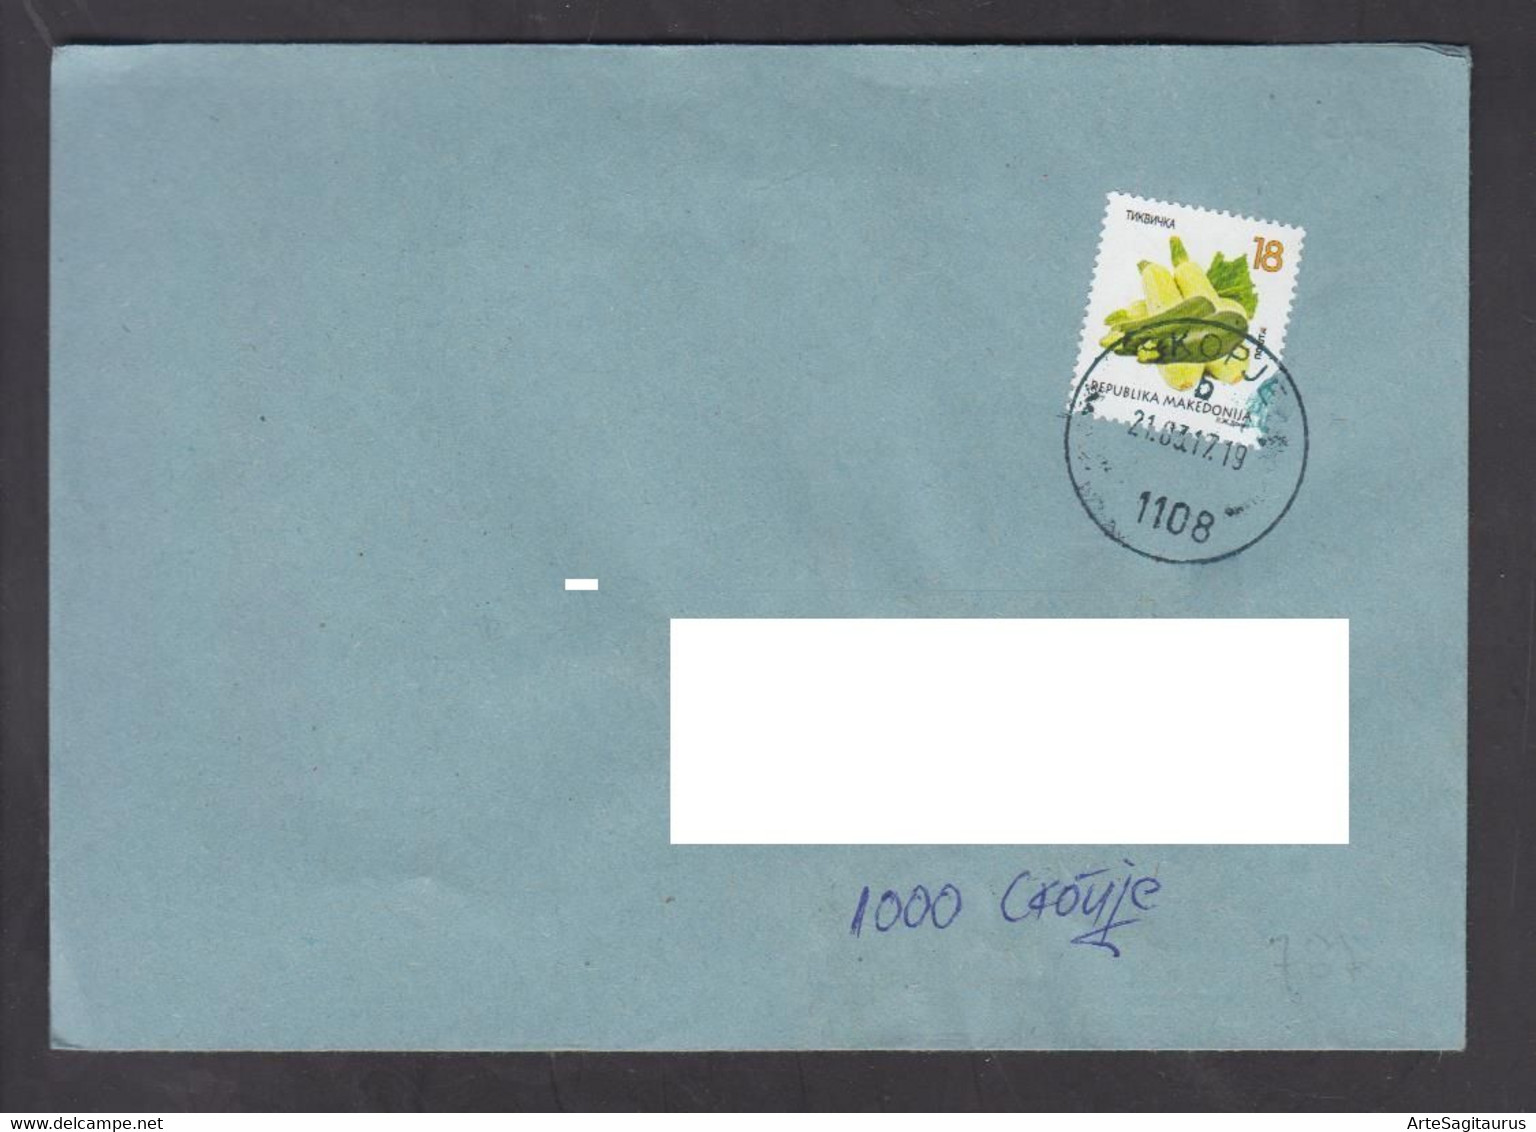 REPUBLIC OF MACEDONIA, COVER, MICHEL 787 - VEGETABLES-Courgette + - Groenten